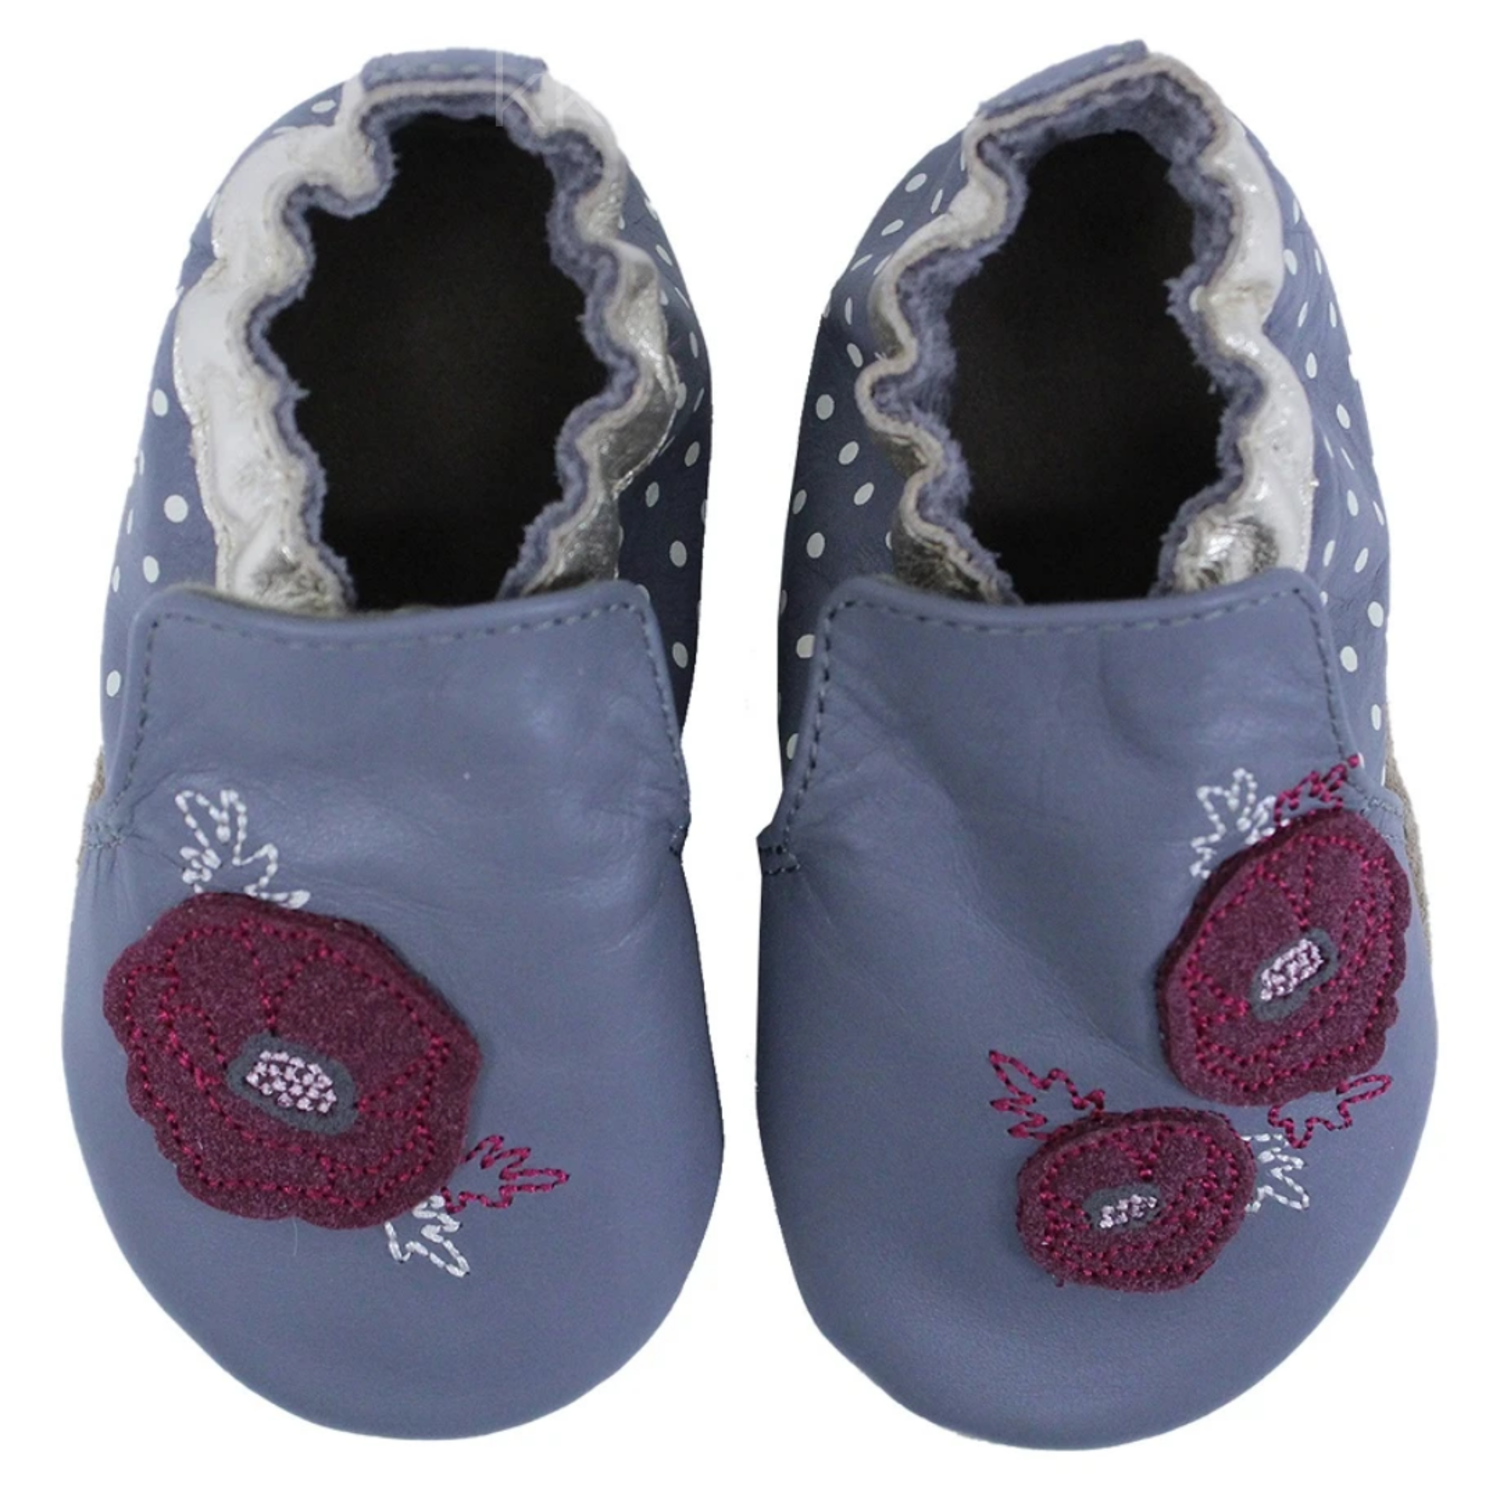 Infant Baby Girls Ankle Boots Grip Sole Inside Zip Floral Shoes Size 